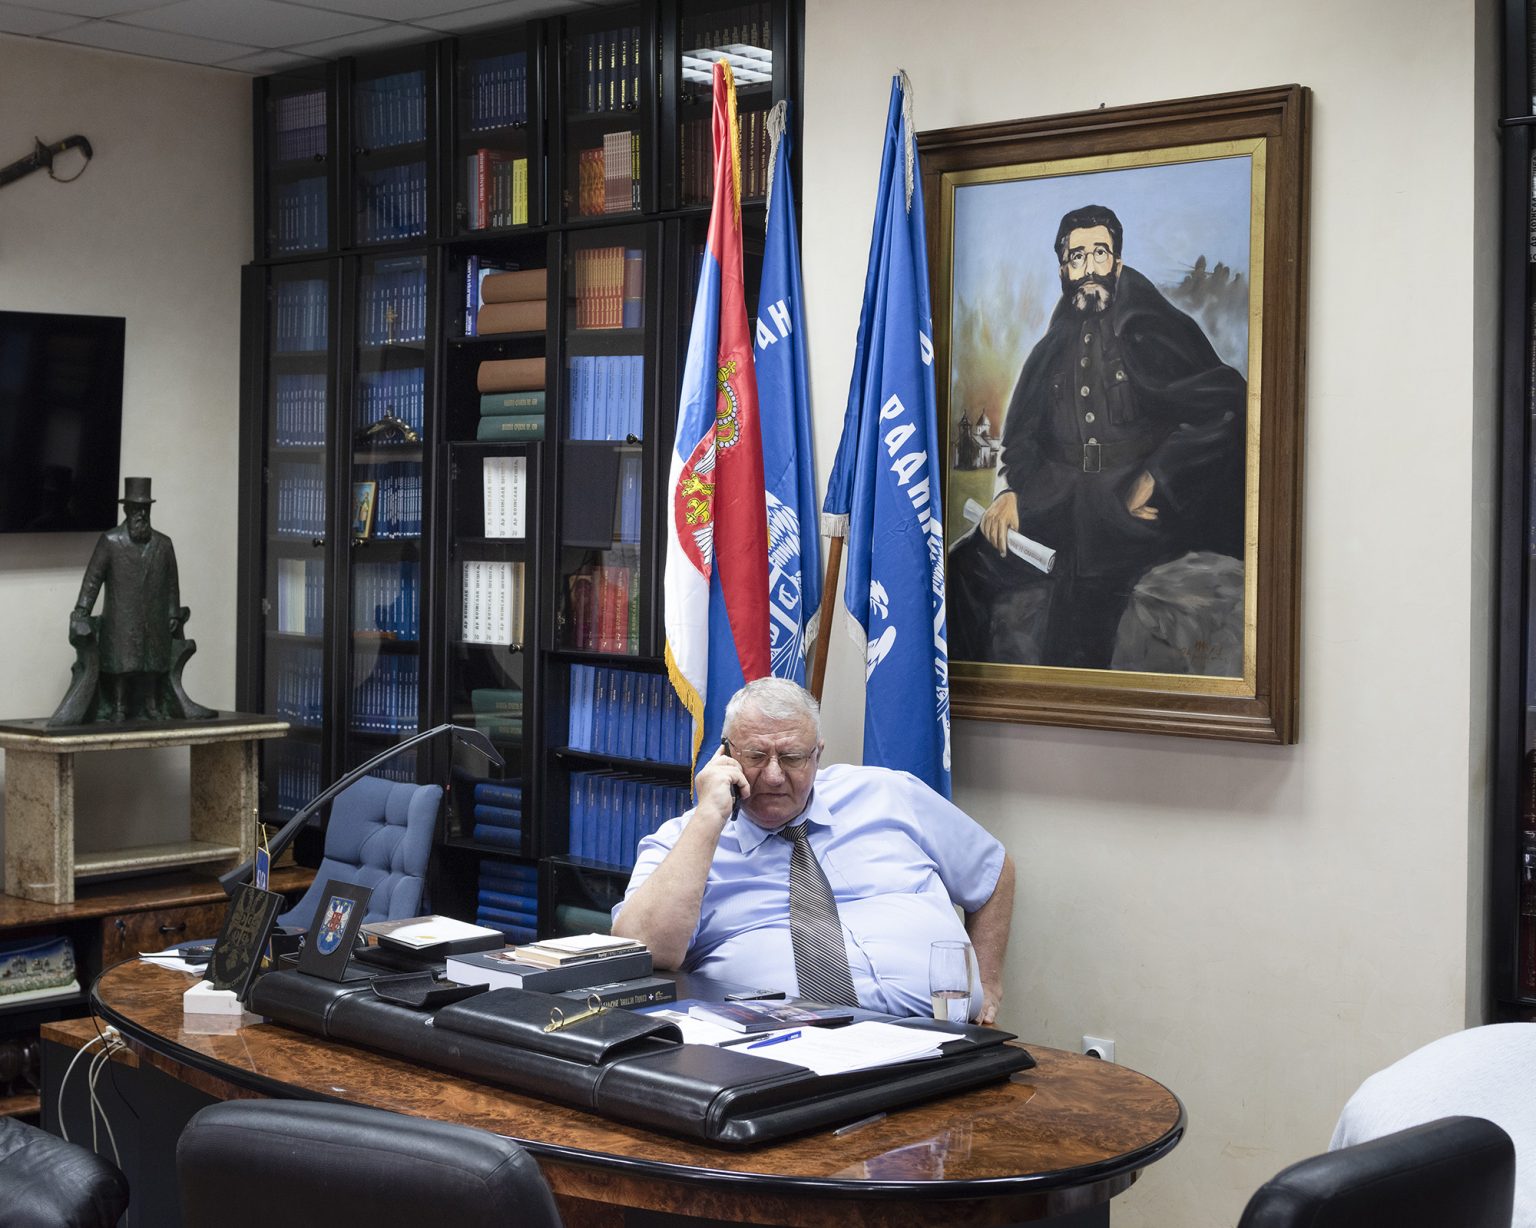 Belgrade, May 2021. Vojislav Šešelj in his office at the SRS seat in the Zemun neighborhood. Seselj is a Serbian politician, founder and president of the far-right Serbian Radical Party (SRS); he was convicted of war crimes by the International Criminal Tribunal for the former Yugoslavia (ICTY). Between 1998 and 2000, he served as the deputy prime minister of Serbia.
After spending 11 years and 9 months in detention in the United Nations Detention Unit of Scheveningen during his trial, Šešelj was permitted to temporarily return to Serbia in November 2014 to undergo cancer treatment. He led the SRS in the 2016 elections, and his party won 23 seats in the parliament. On 11 April 2018, the Appeals Chamber partially reversed the first-instance verdict, finding Šešelj guilty of crimes against humanity for his role in instigating the deportation of Croats from Hrtkovci. He was found not guilty on the remaining counts of his indictment, including all the war crimes and crimes against humanity that he was alleged to have committed in Croatia and Bosnia. Šešelj was sentenced to 10 years in prison, but because of time already spent in ICTY custody, he was not obligated to return to prison.